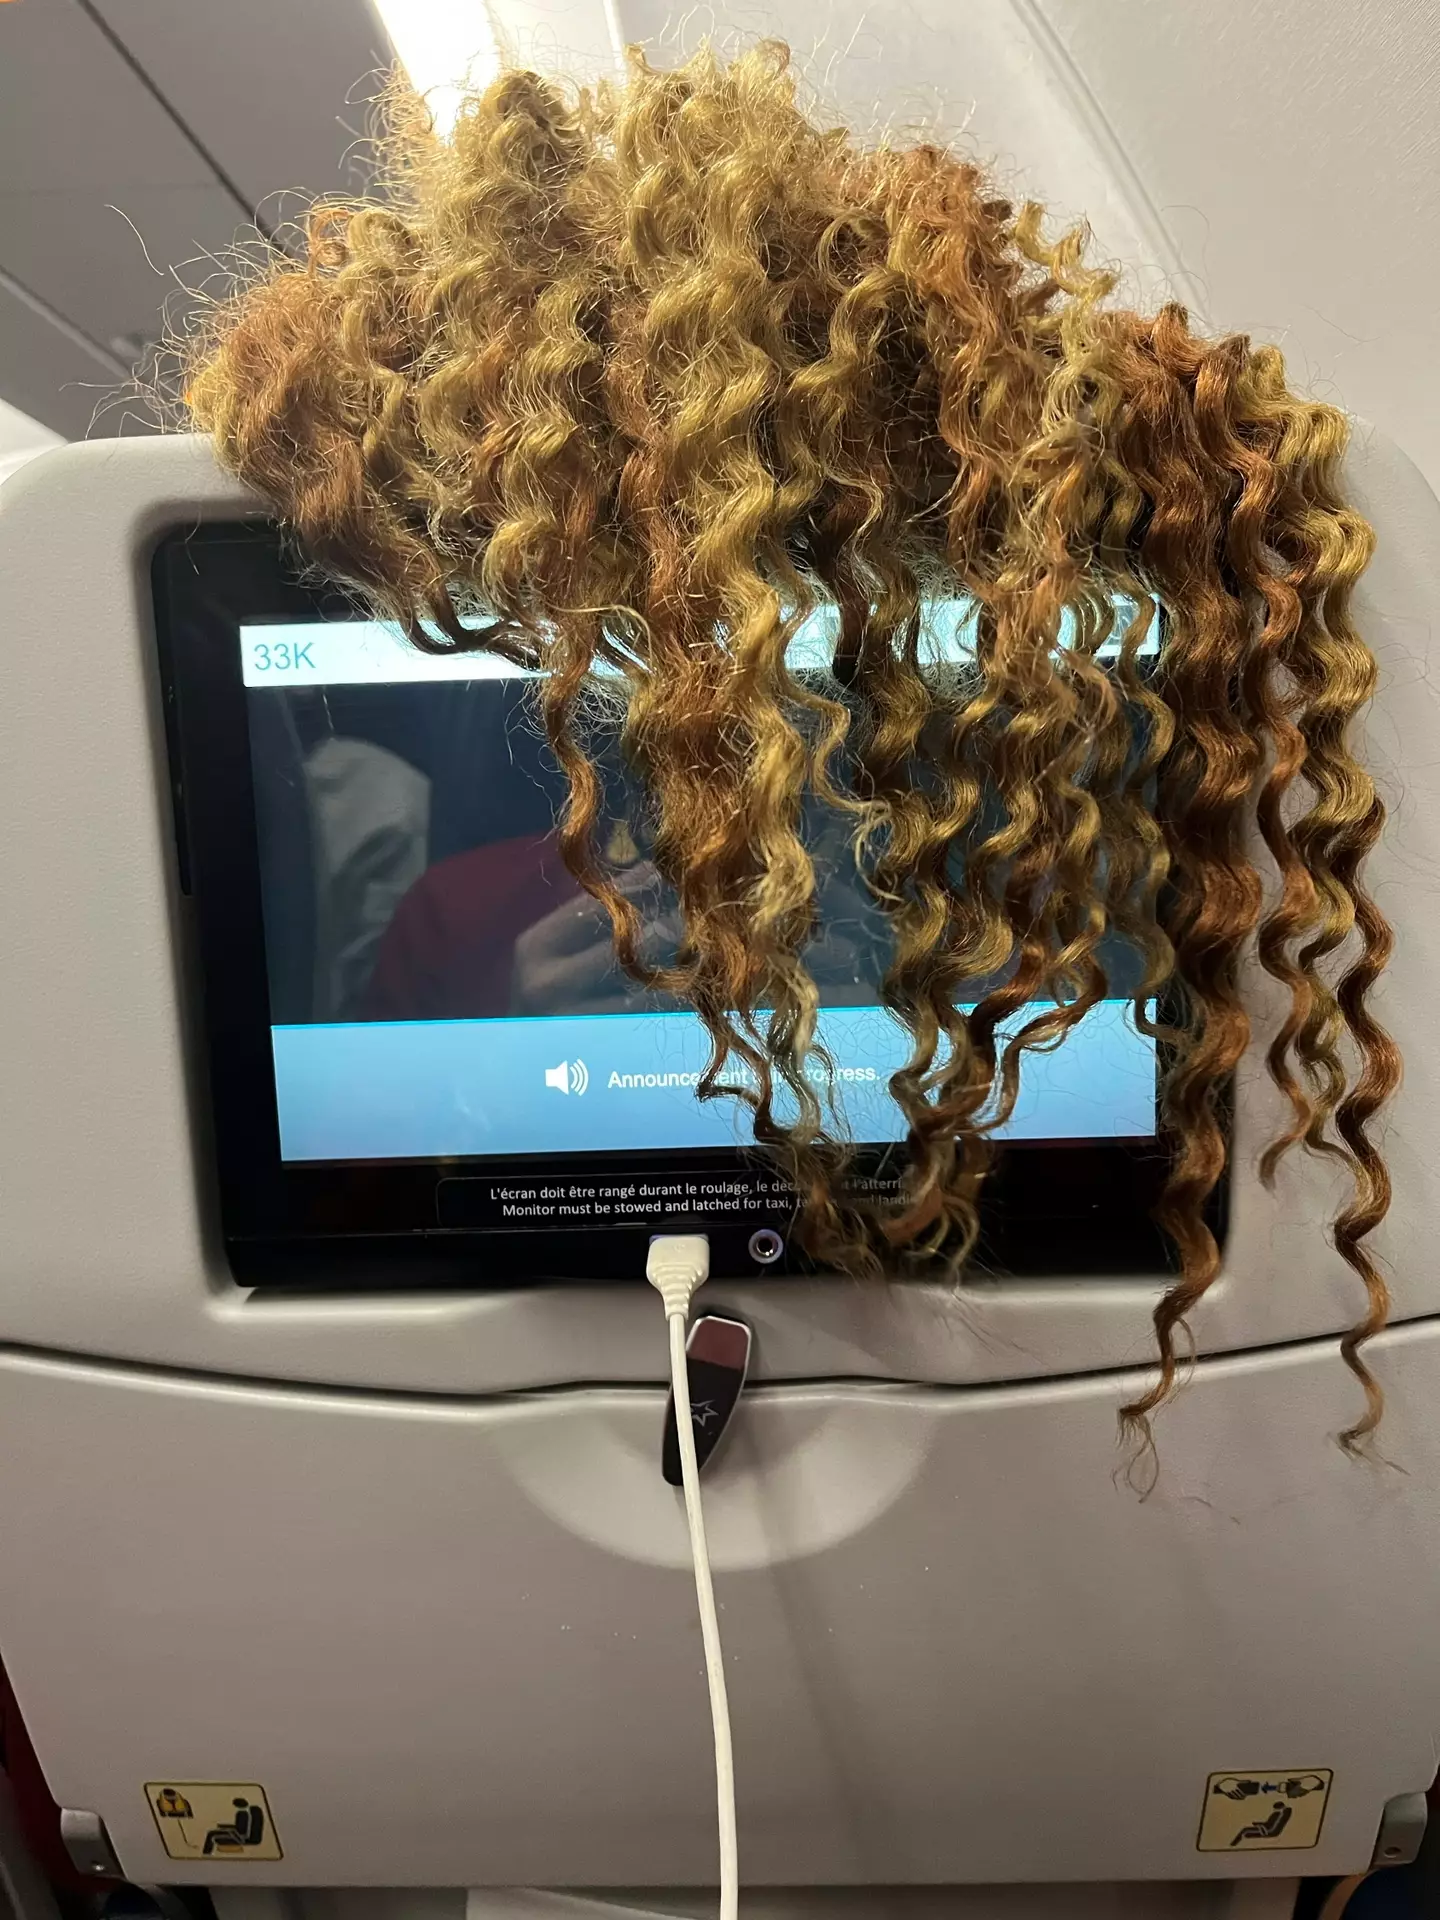 The woman trailed her long tresses down the back of the seat.